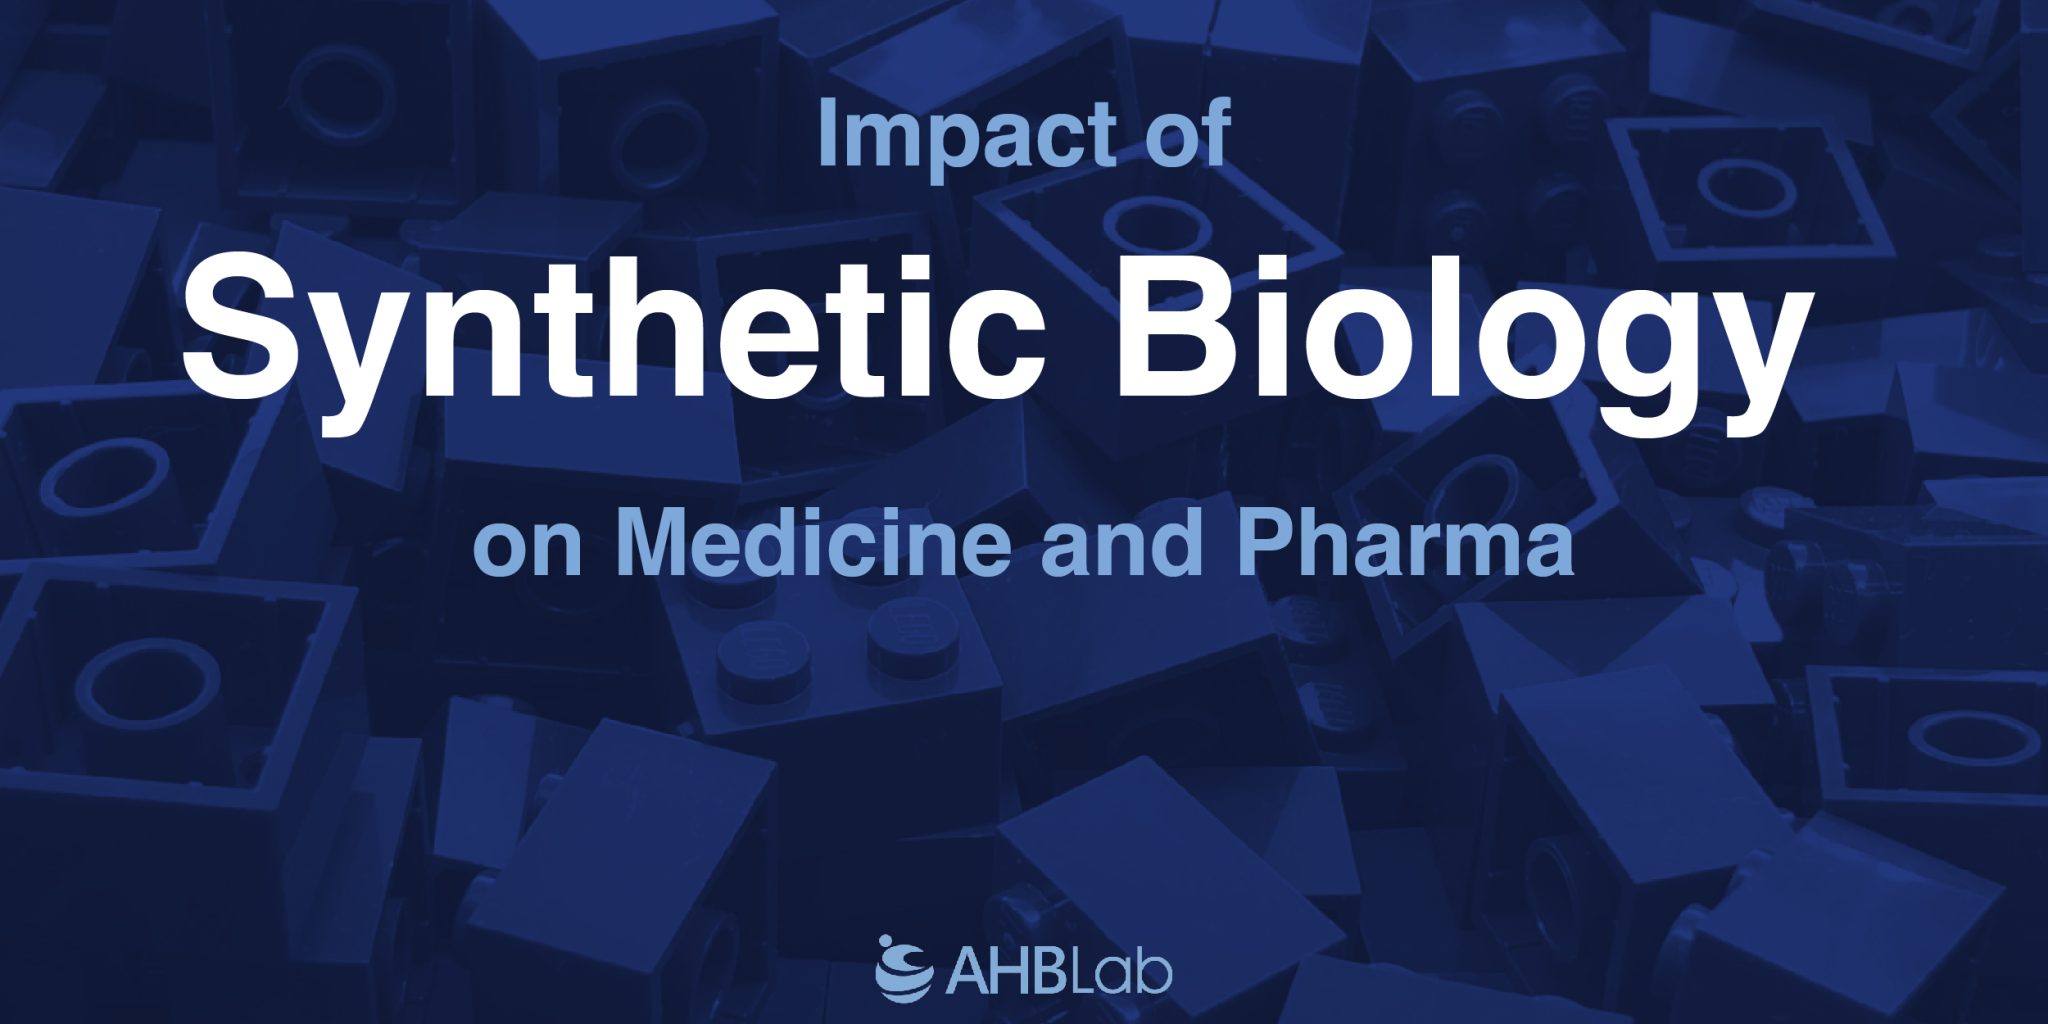 Impact of Synthetic Biology on Medicine and Pharma